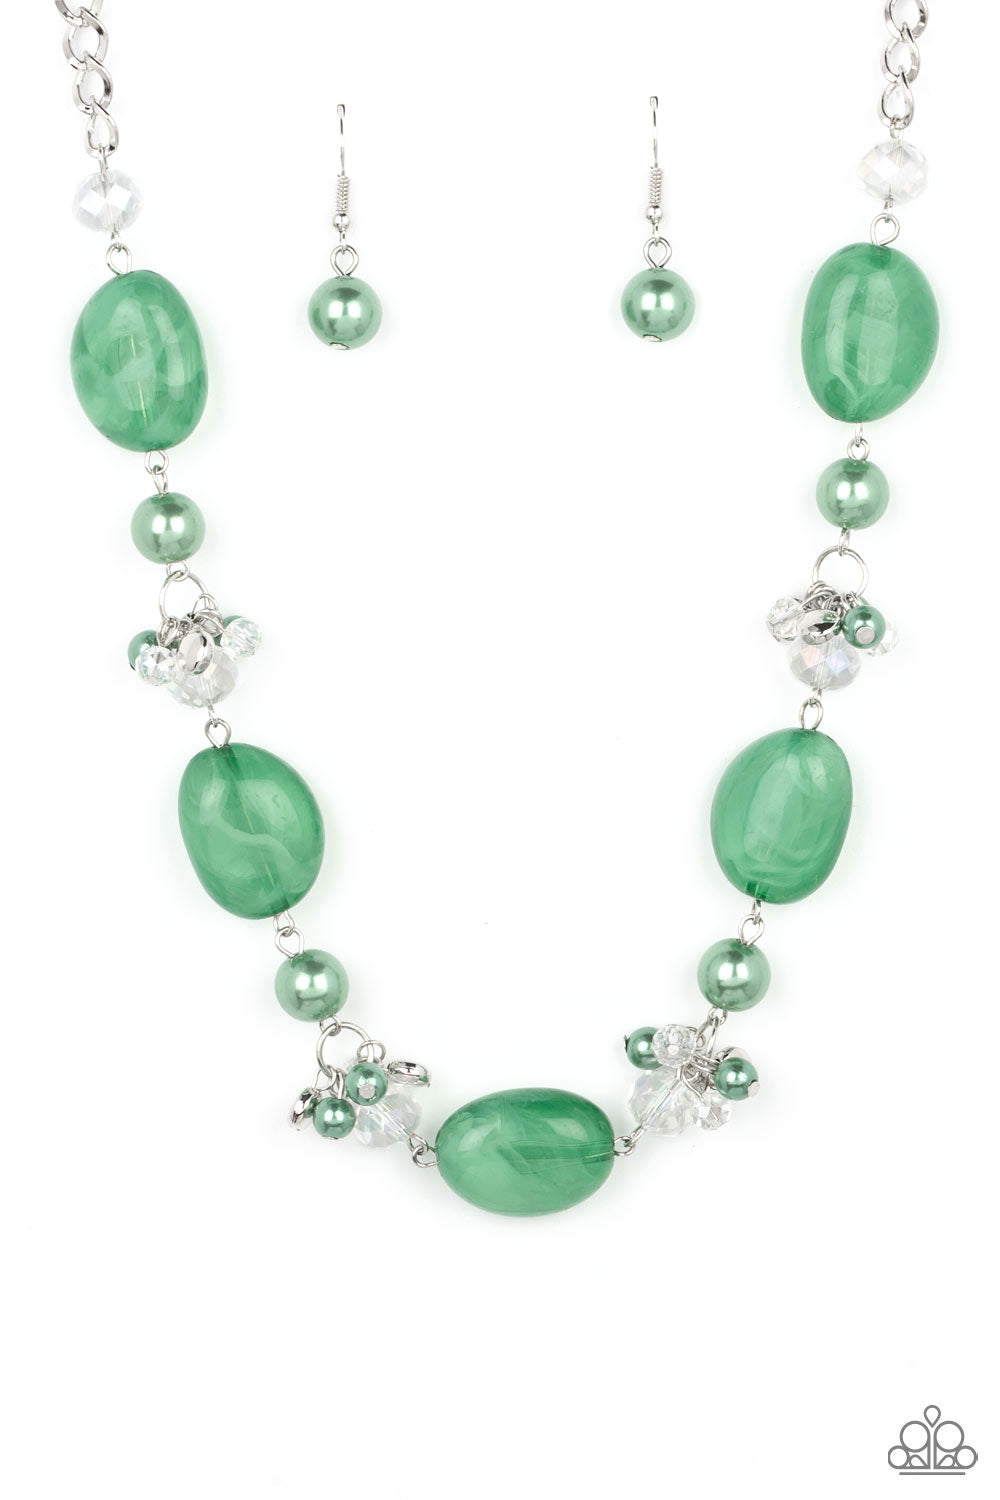 The Top TENACIOUS Green Necklace - Paparazzi Accessories  Featuring a faux stone look, a refreshing collection of cloudy Leprechaun beads join bubbly Leprechaun pearls, and white crystal-like gems below the collar. Dainty clusters of Leprechaun pearls, flat silver beads, and white crystal-like gems adorn the display, adding effervescent movement to the whimsical scene. Features an adjustable clasp closure.  Sold as one individual necklace. Includes one pair of matching earrings.